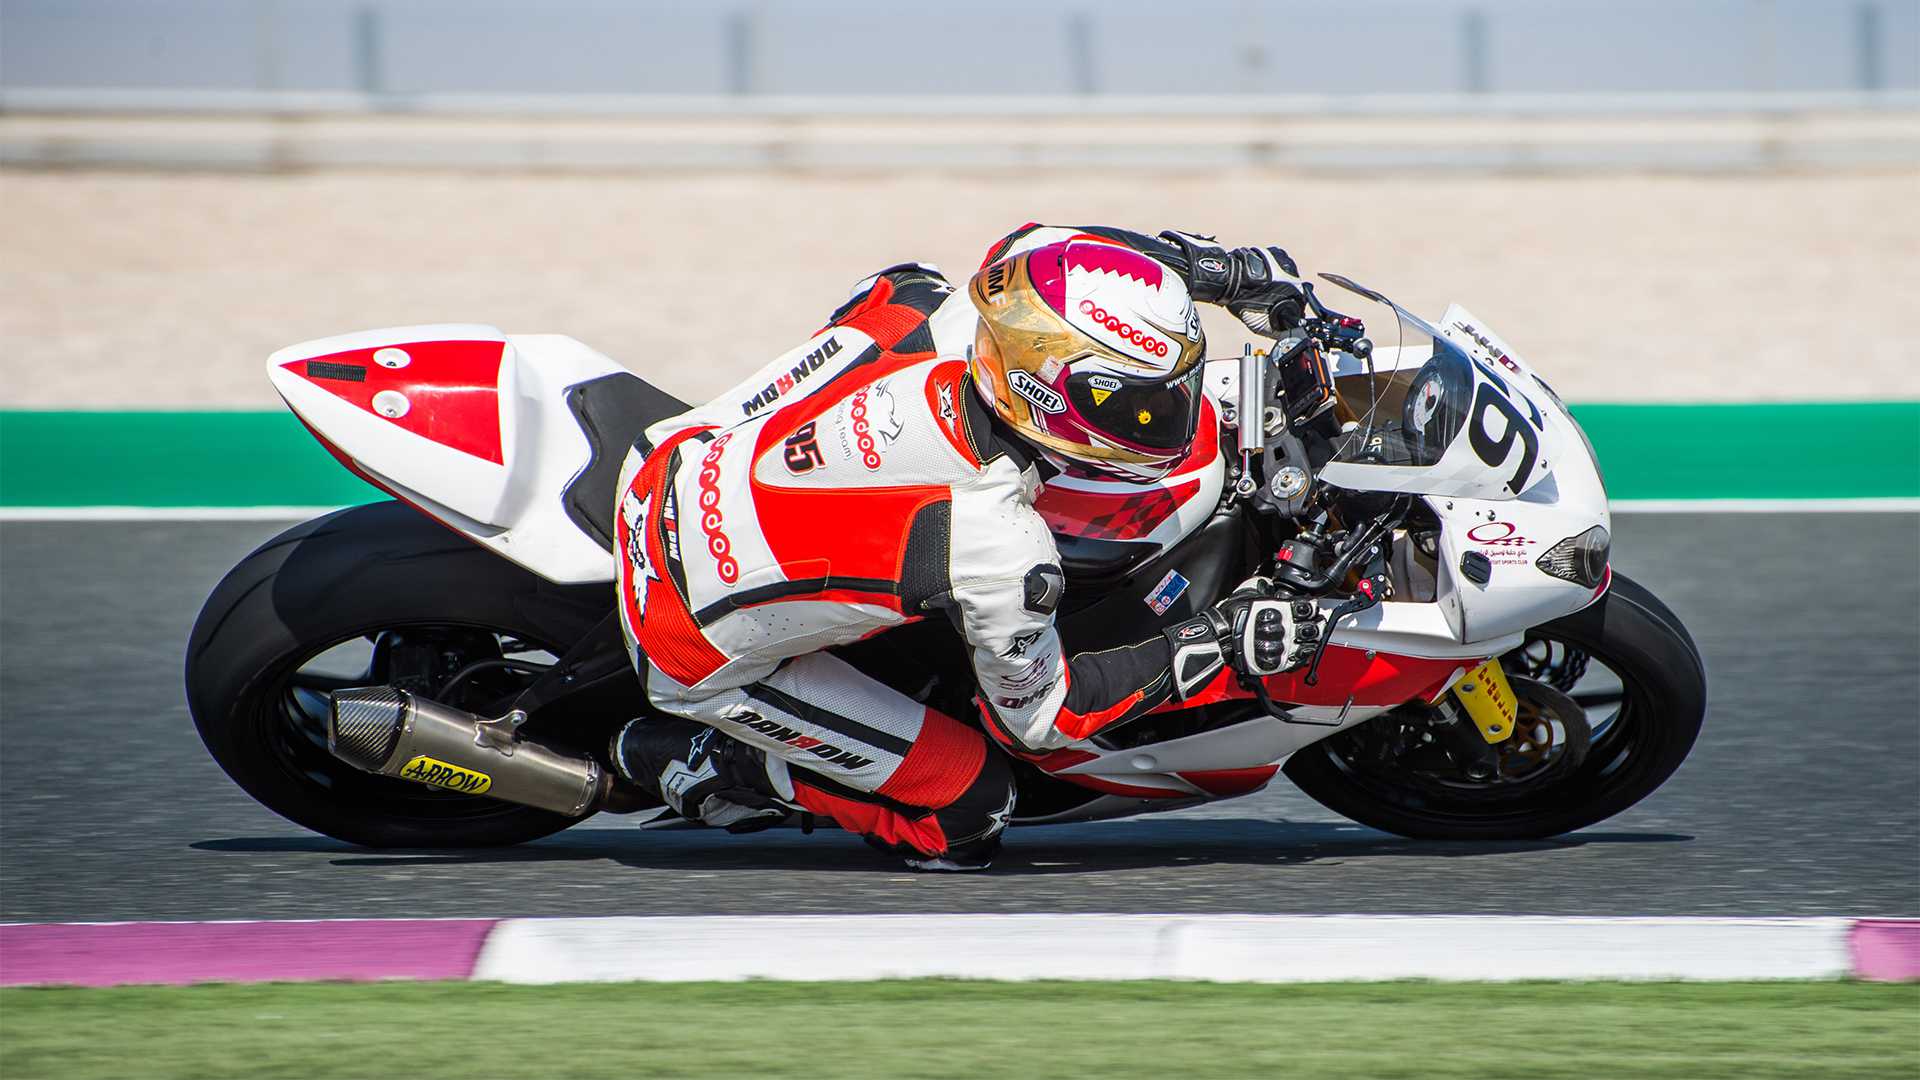 Al Naimi takes his first Superpole of the QSTK season